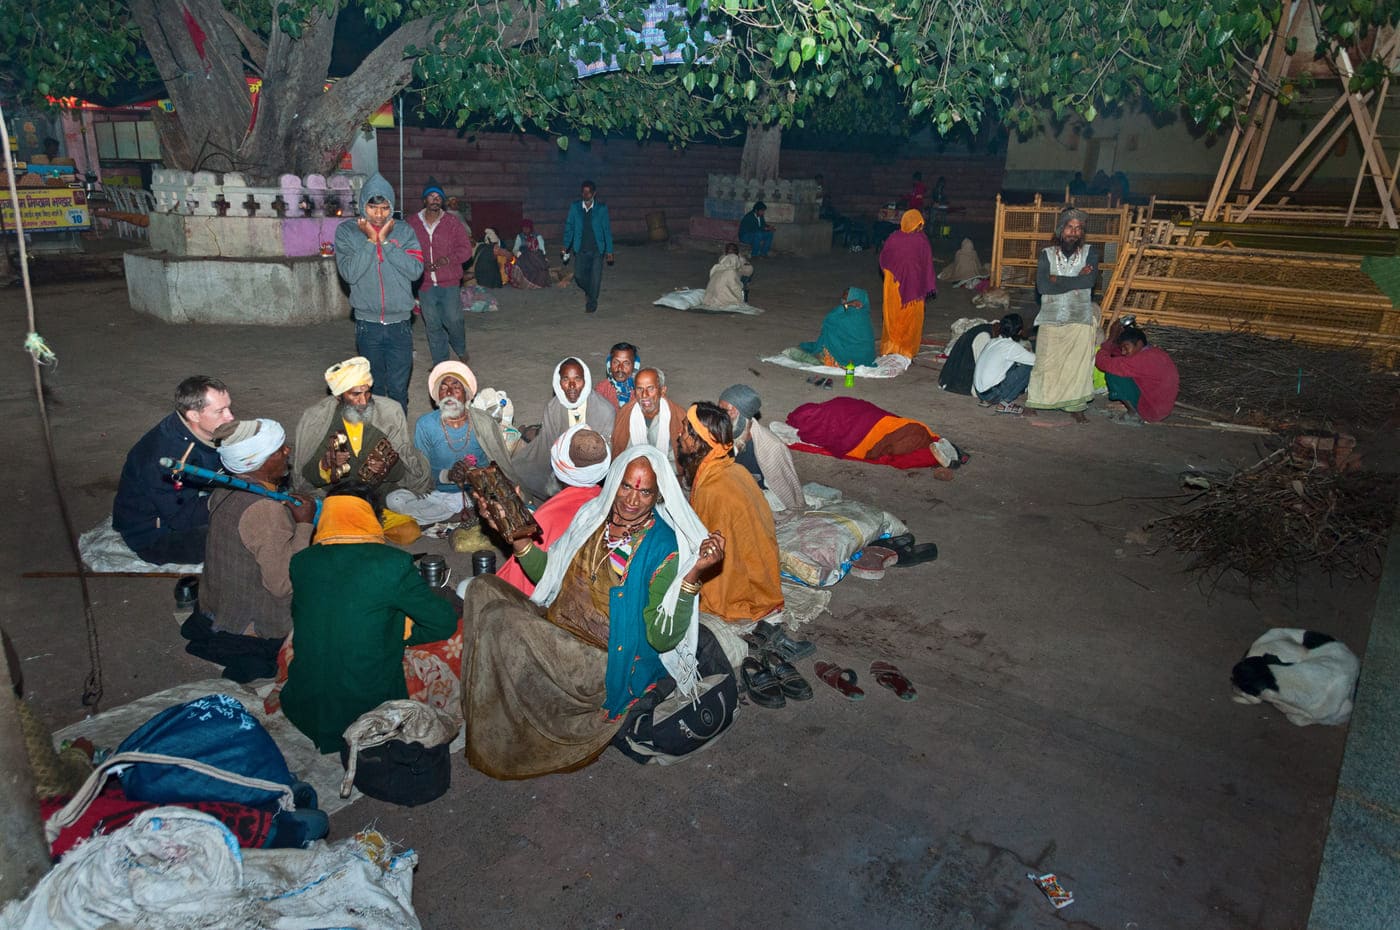 Group of Sadhus in Orchha sitting on the ground, playing musical instruments at night, and enjoying 